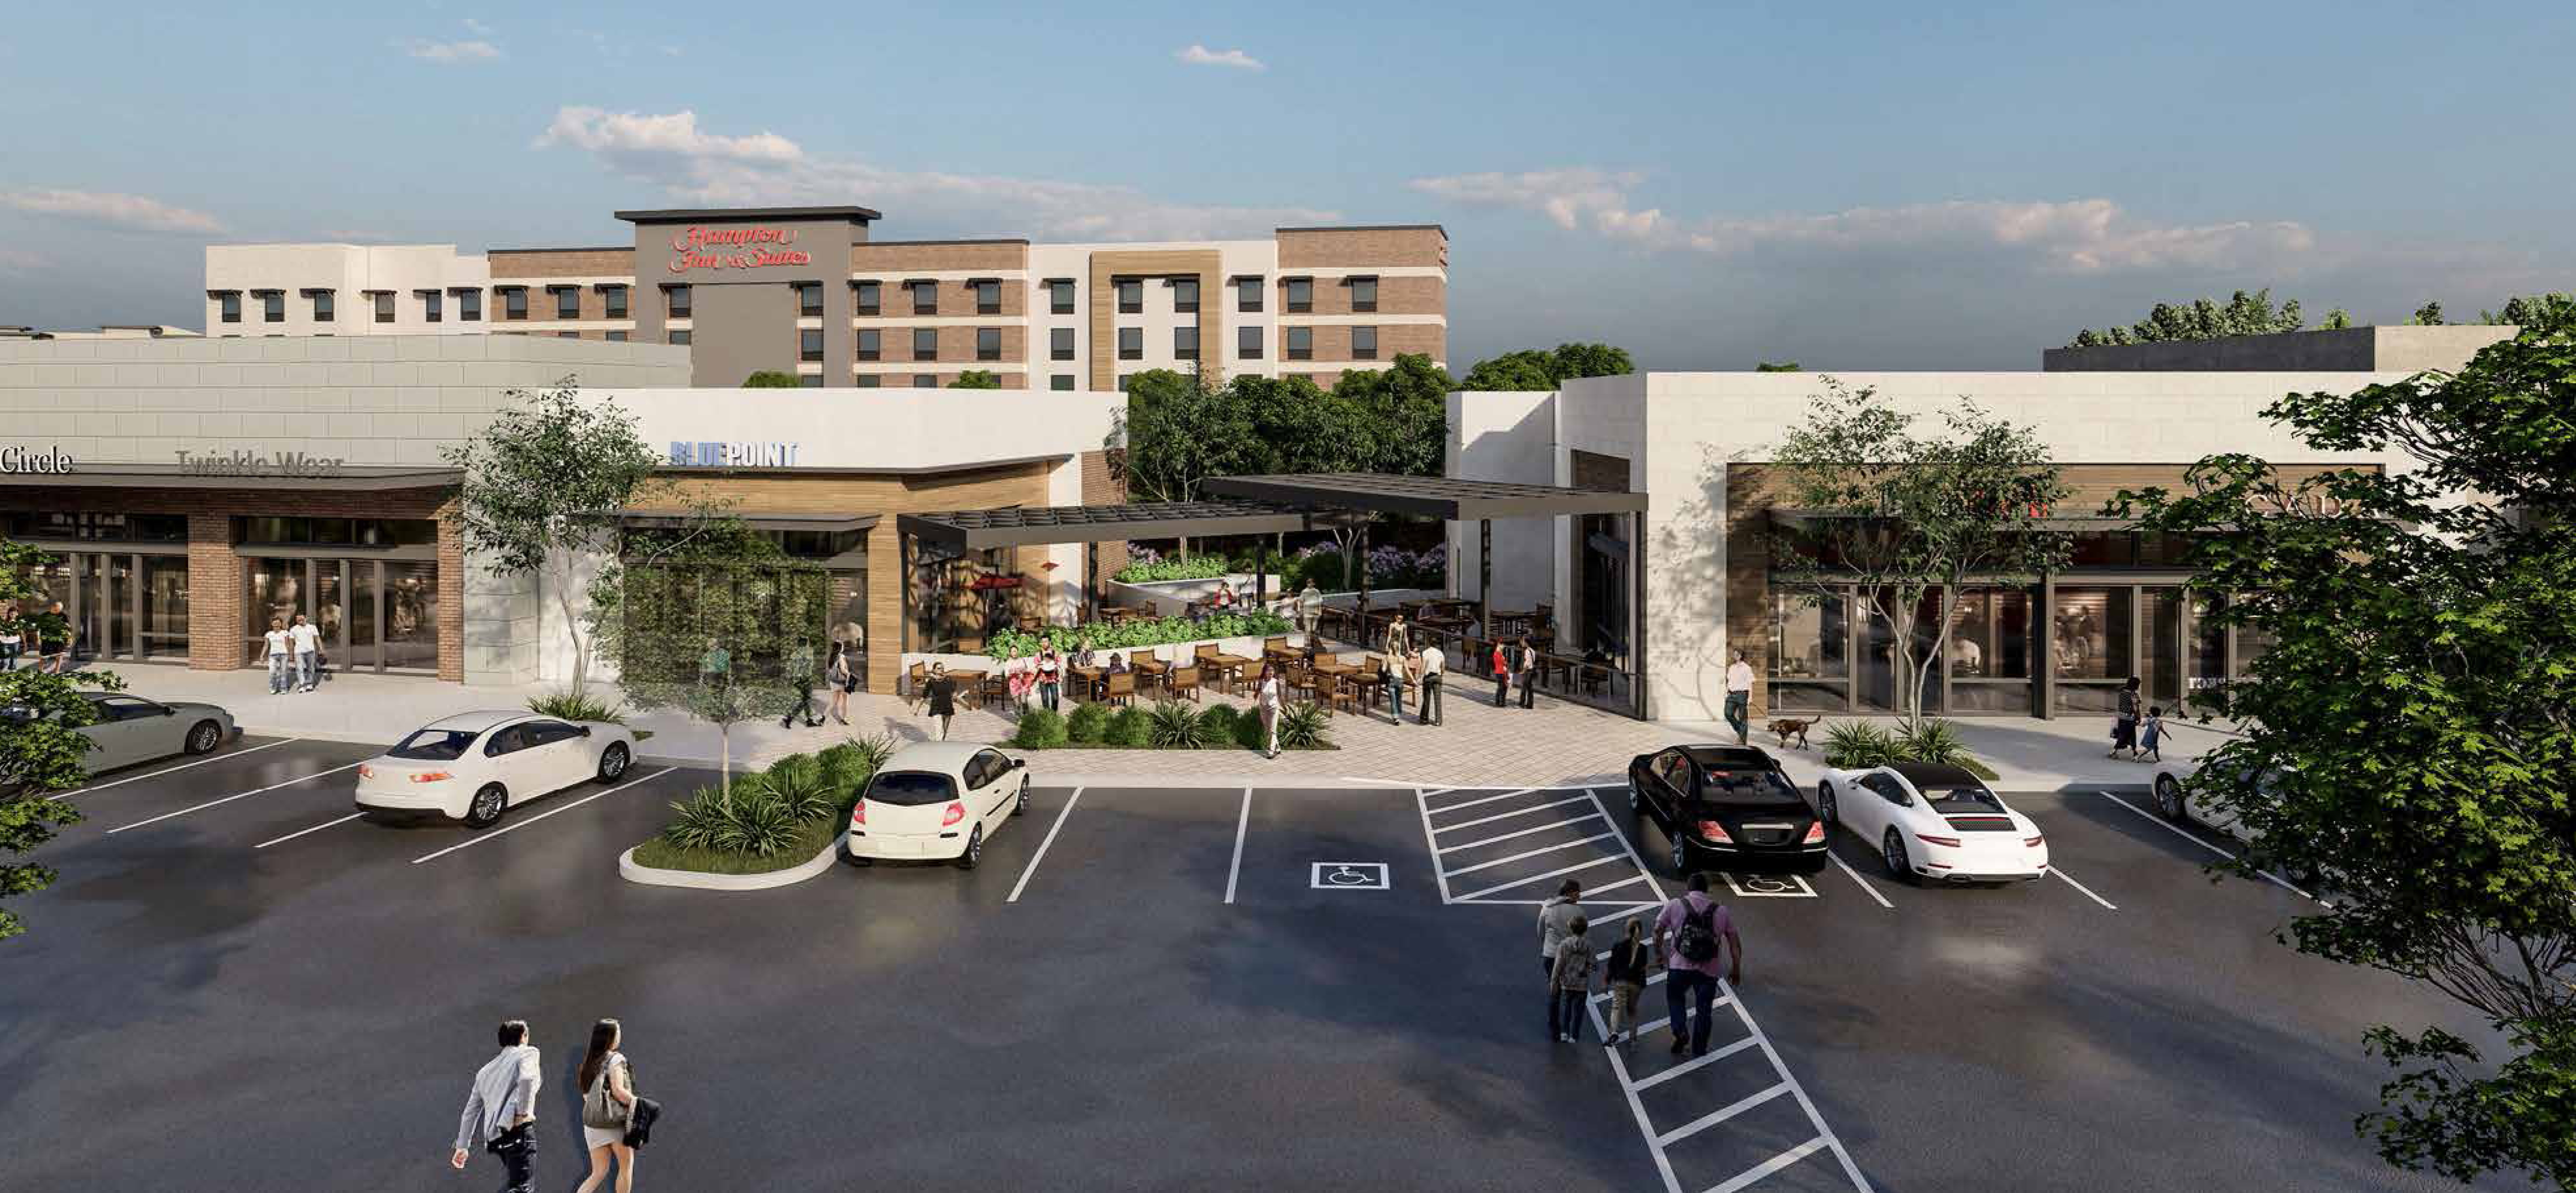 Sycamore Crossing Rendering Storefronts and Hotel